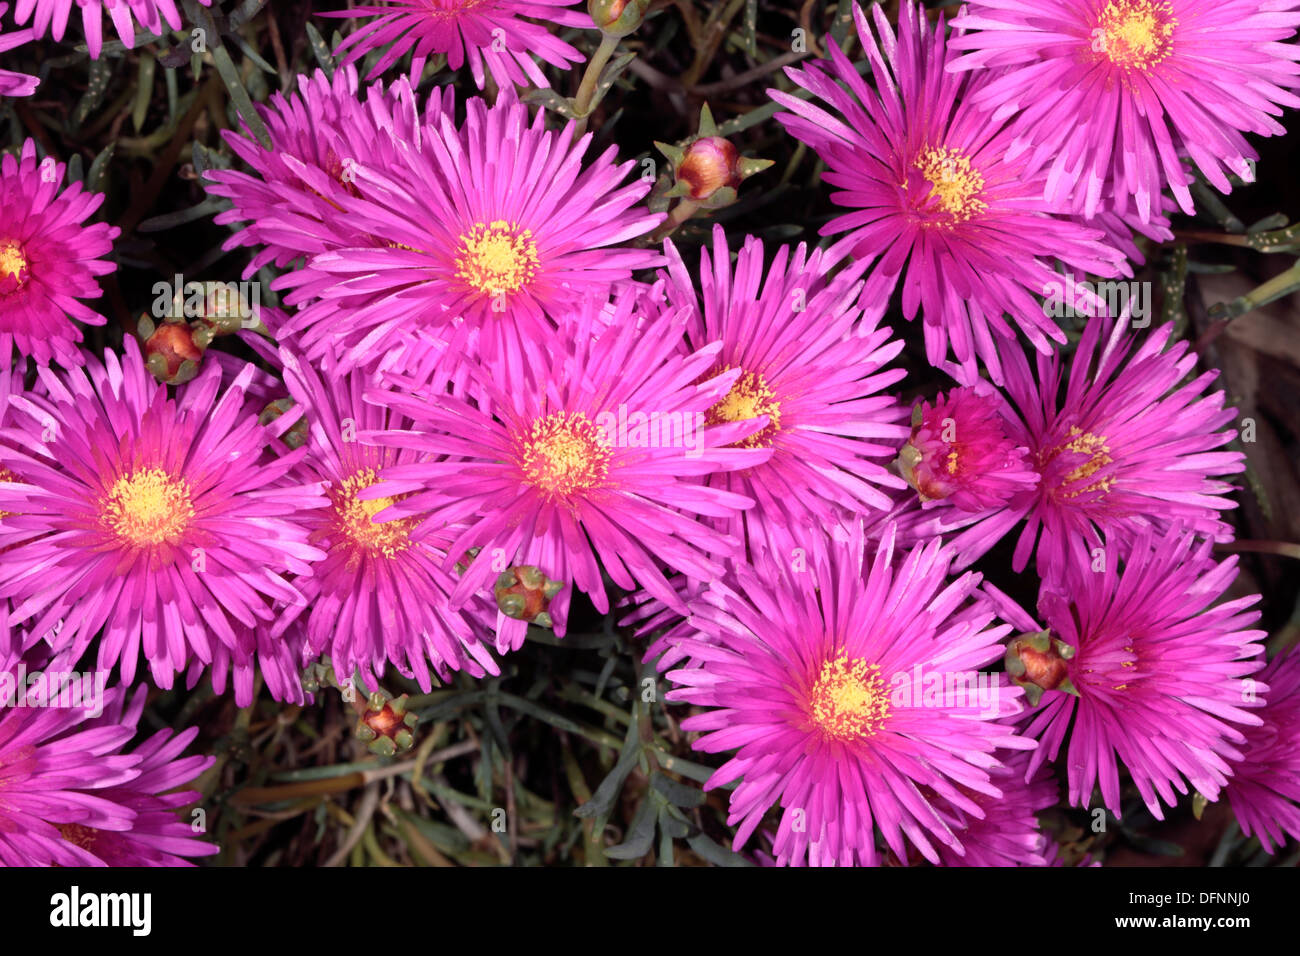 Pink Lampranthus / Trailing Ice plant / Vygie- Lampranthus-Family Aizoaceae Stock Photo